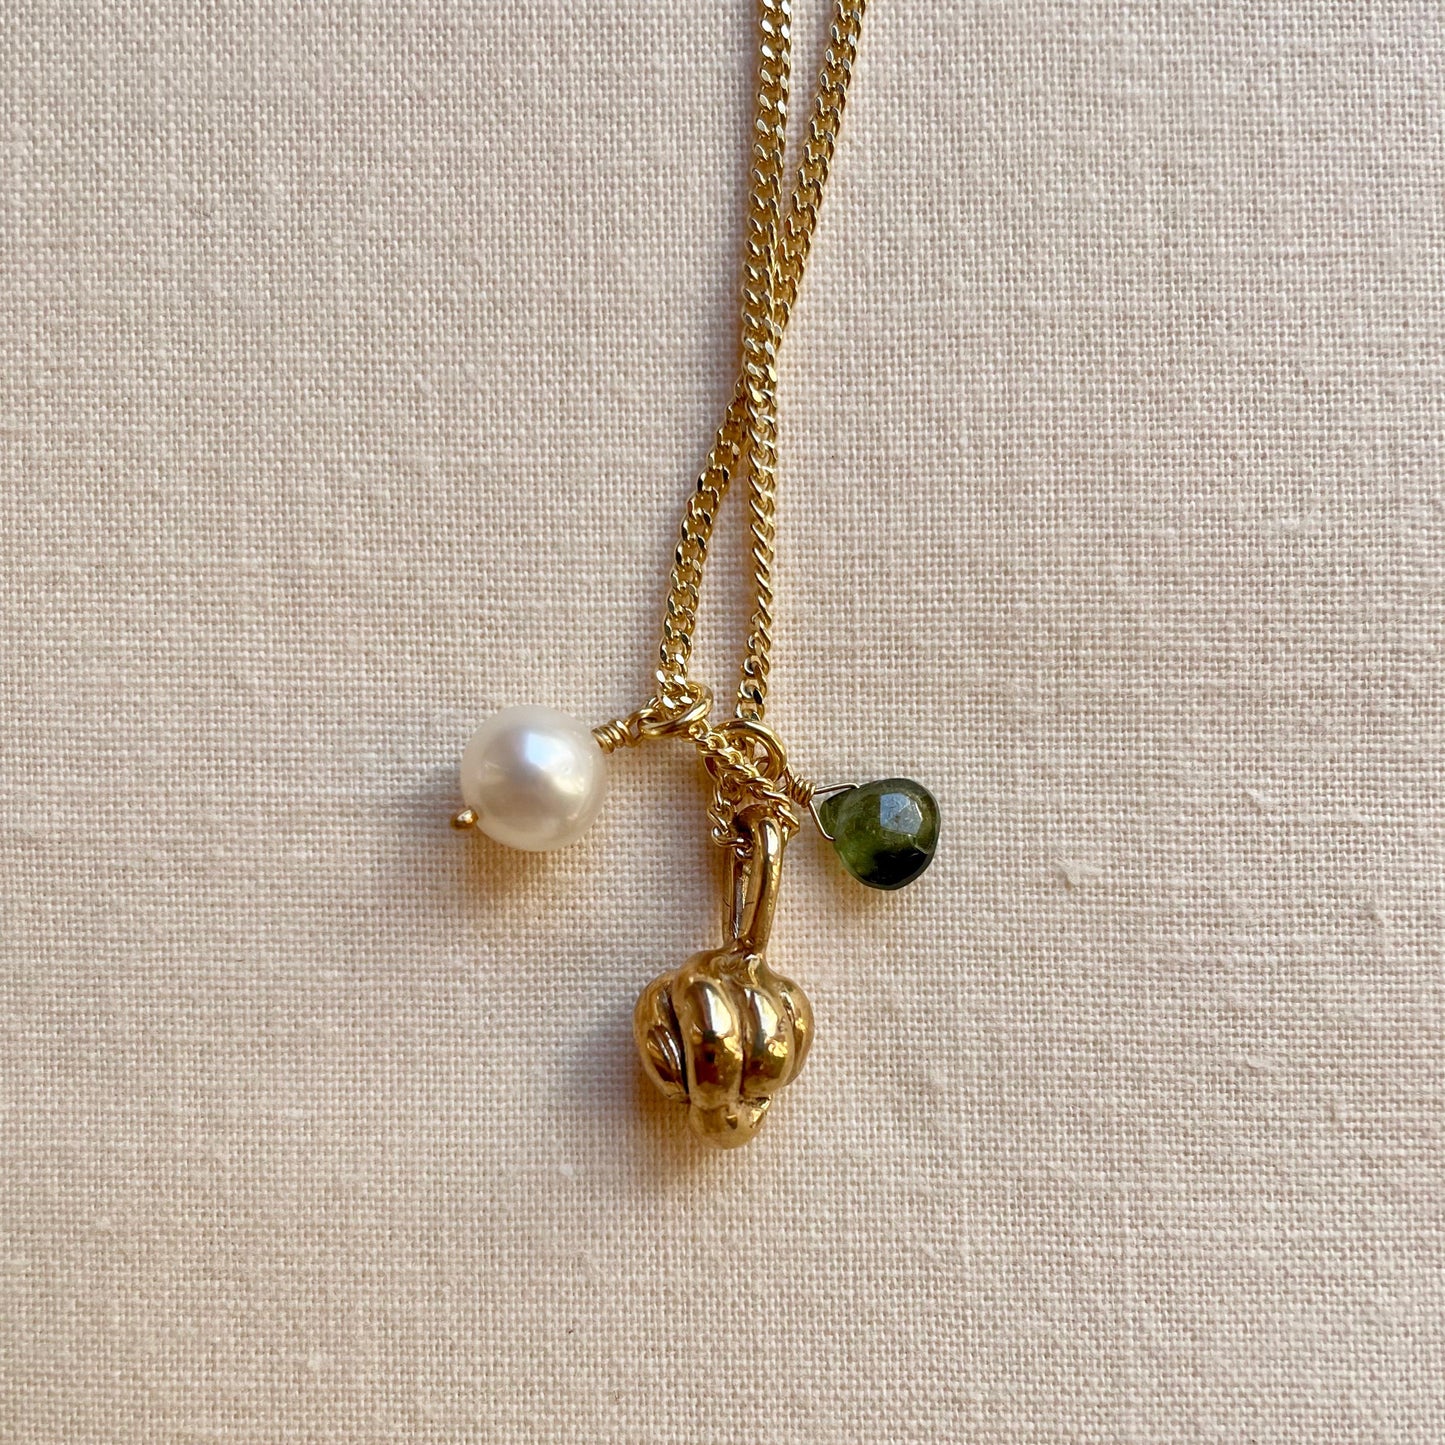 Be Free Necklace. Bronze knot, Pearl and Green Tourmaline Briolette